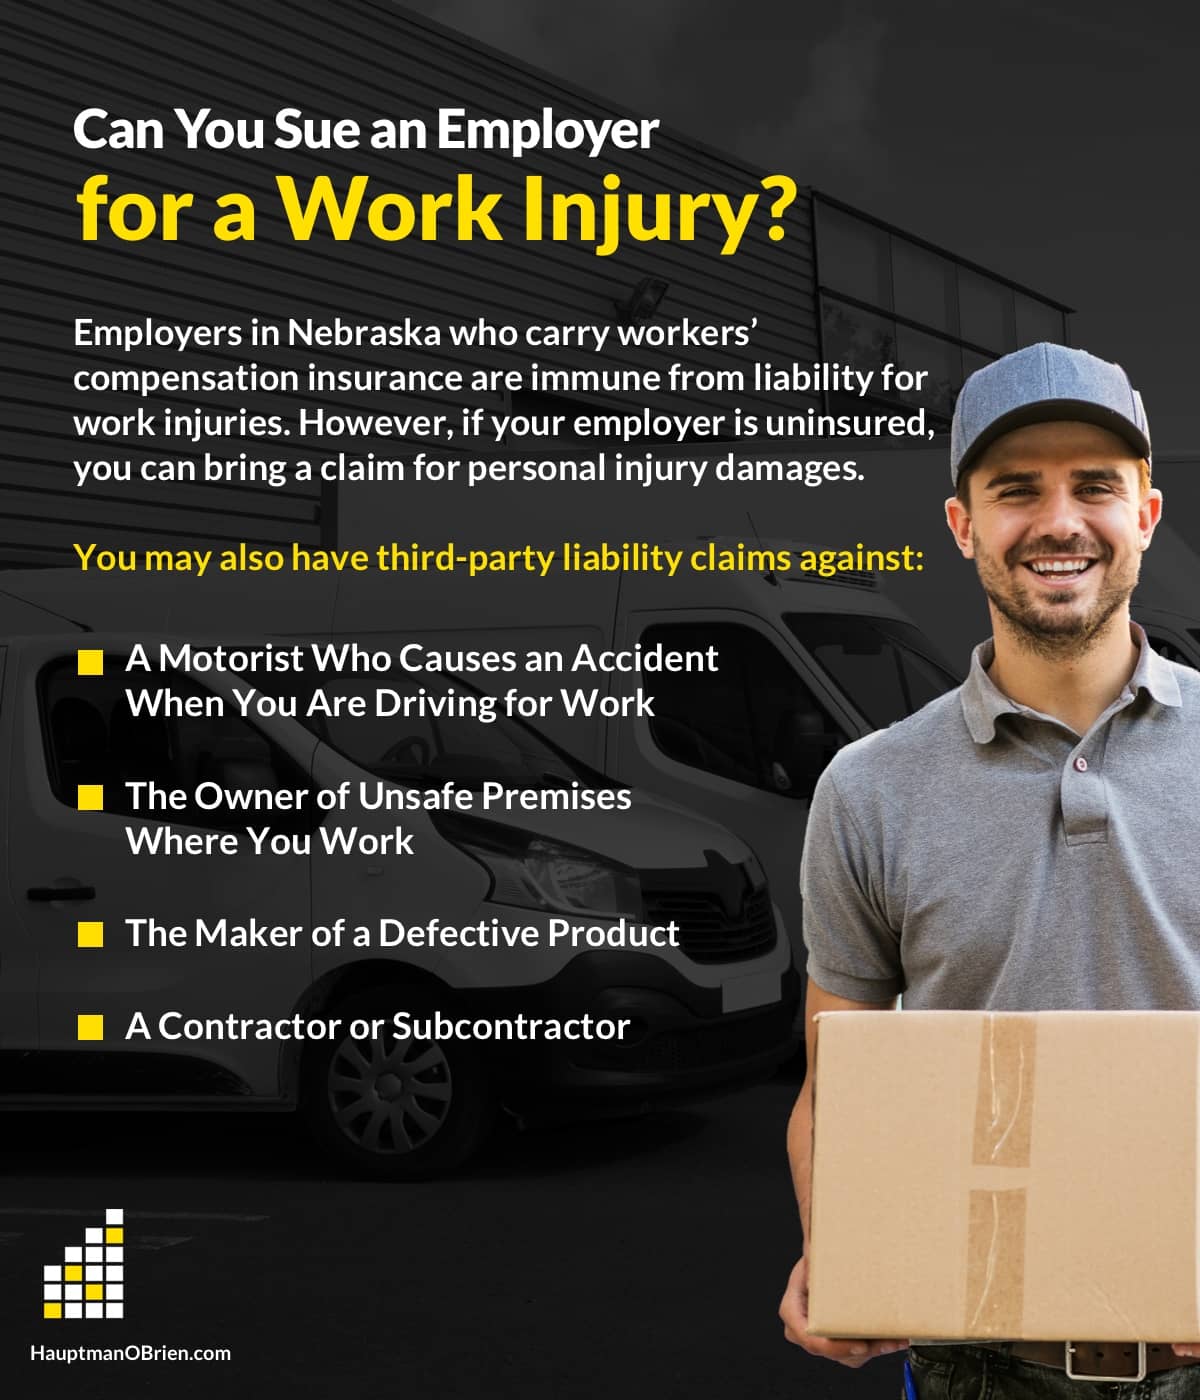 can you sue an employer for a work injury?